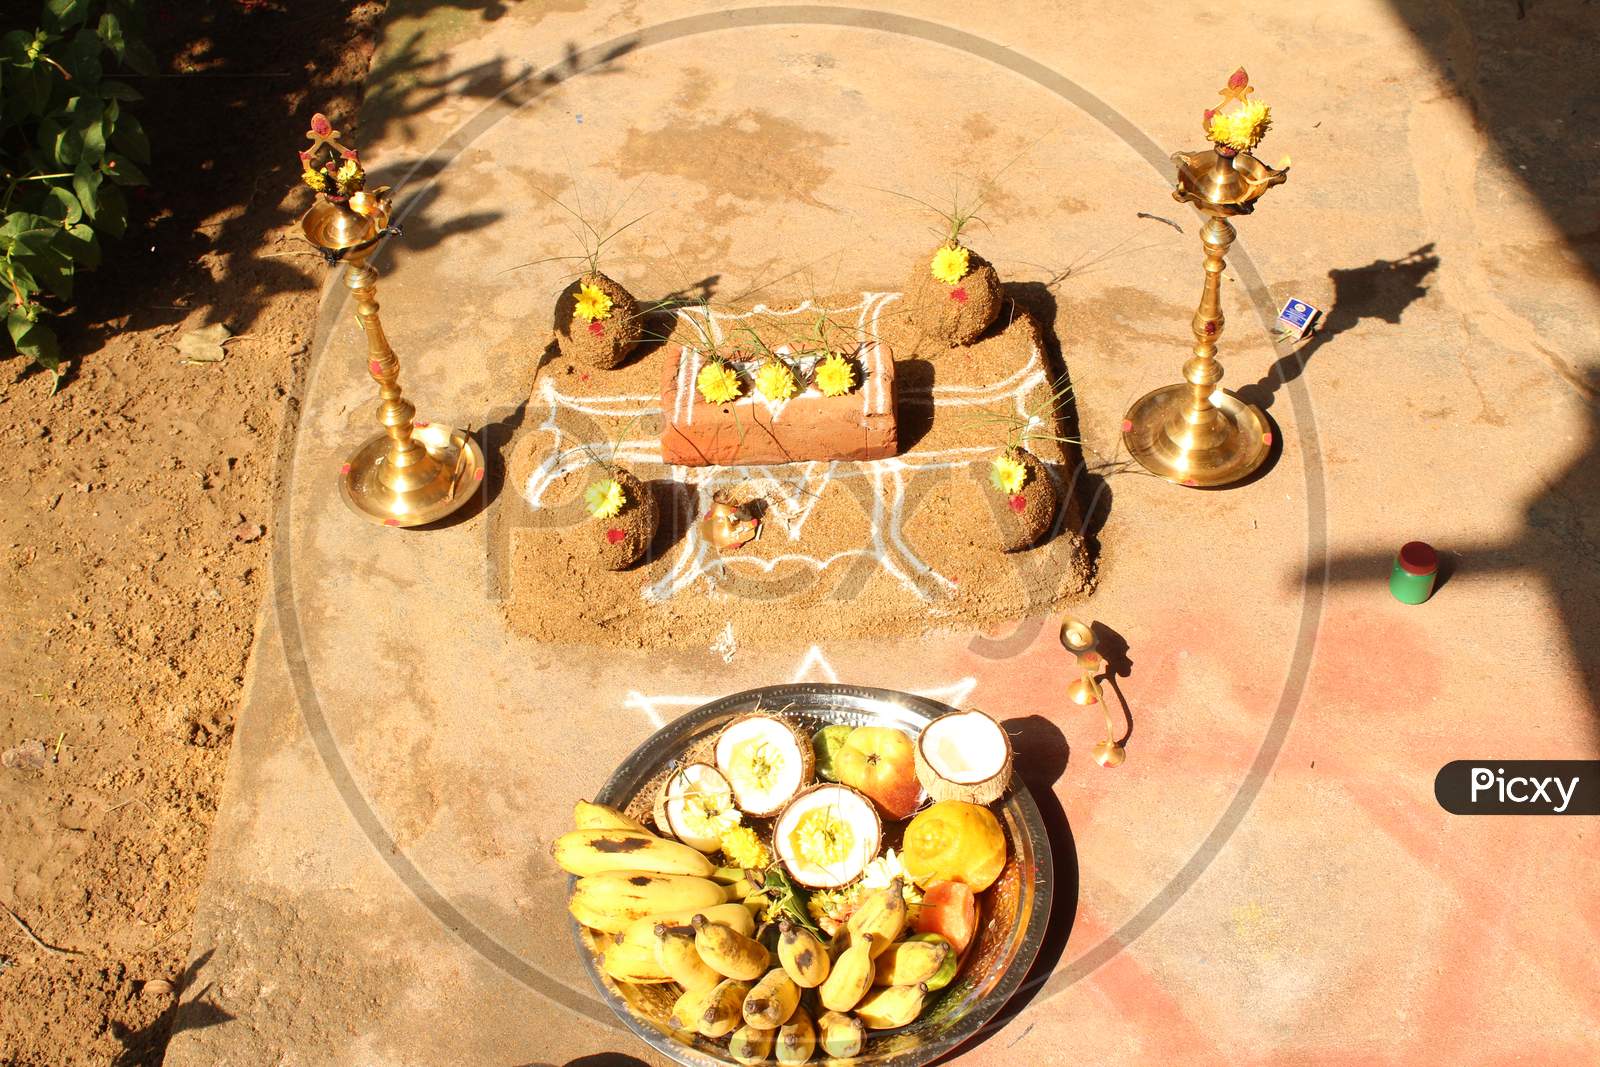 Celebrating Traditional Thai Pongal Festival To Sun God With Pot, Lamp,Wood Fire Stove, Fruits And Sugarcane